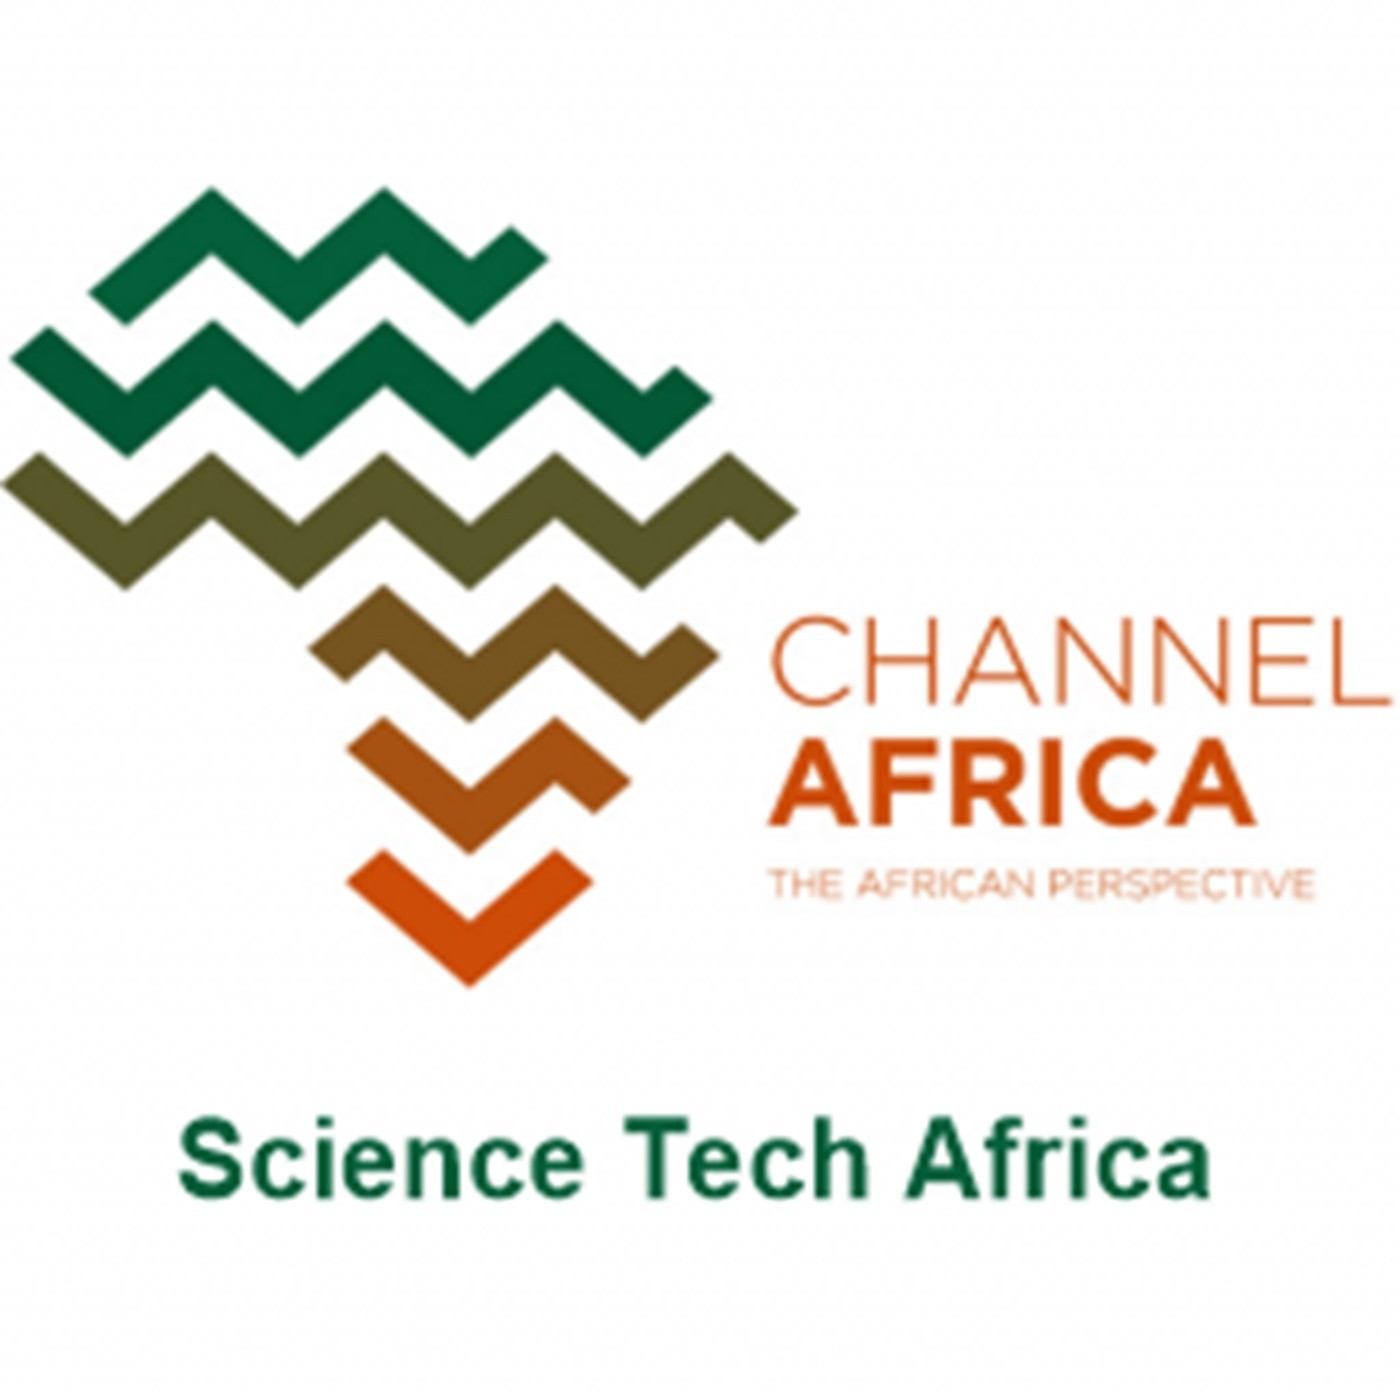 SCIENCE TECH AFRICA 05 FEBRUARY 2022